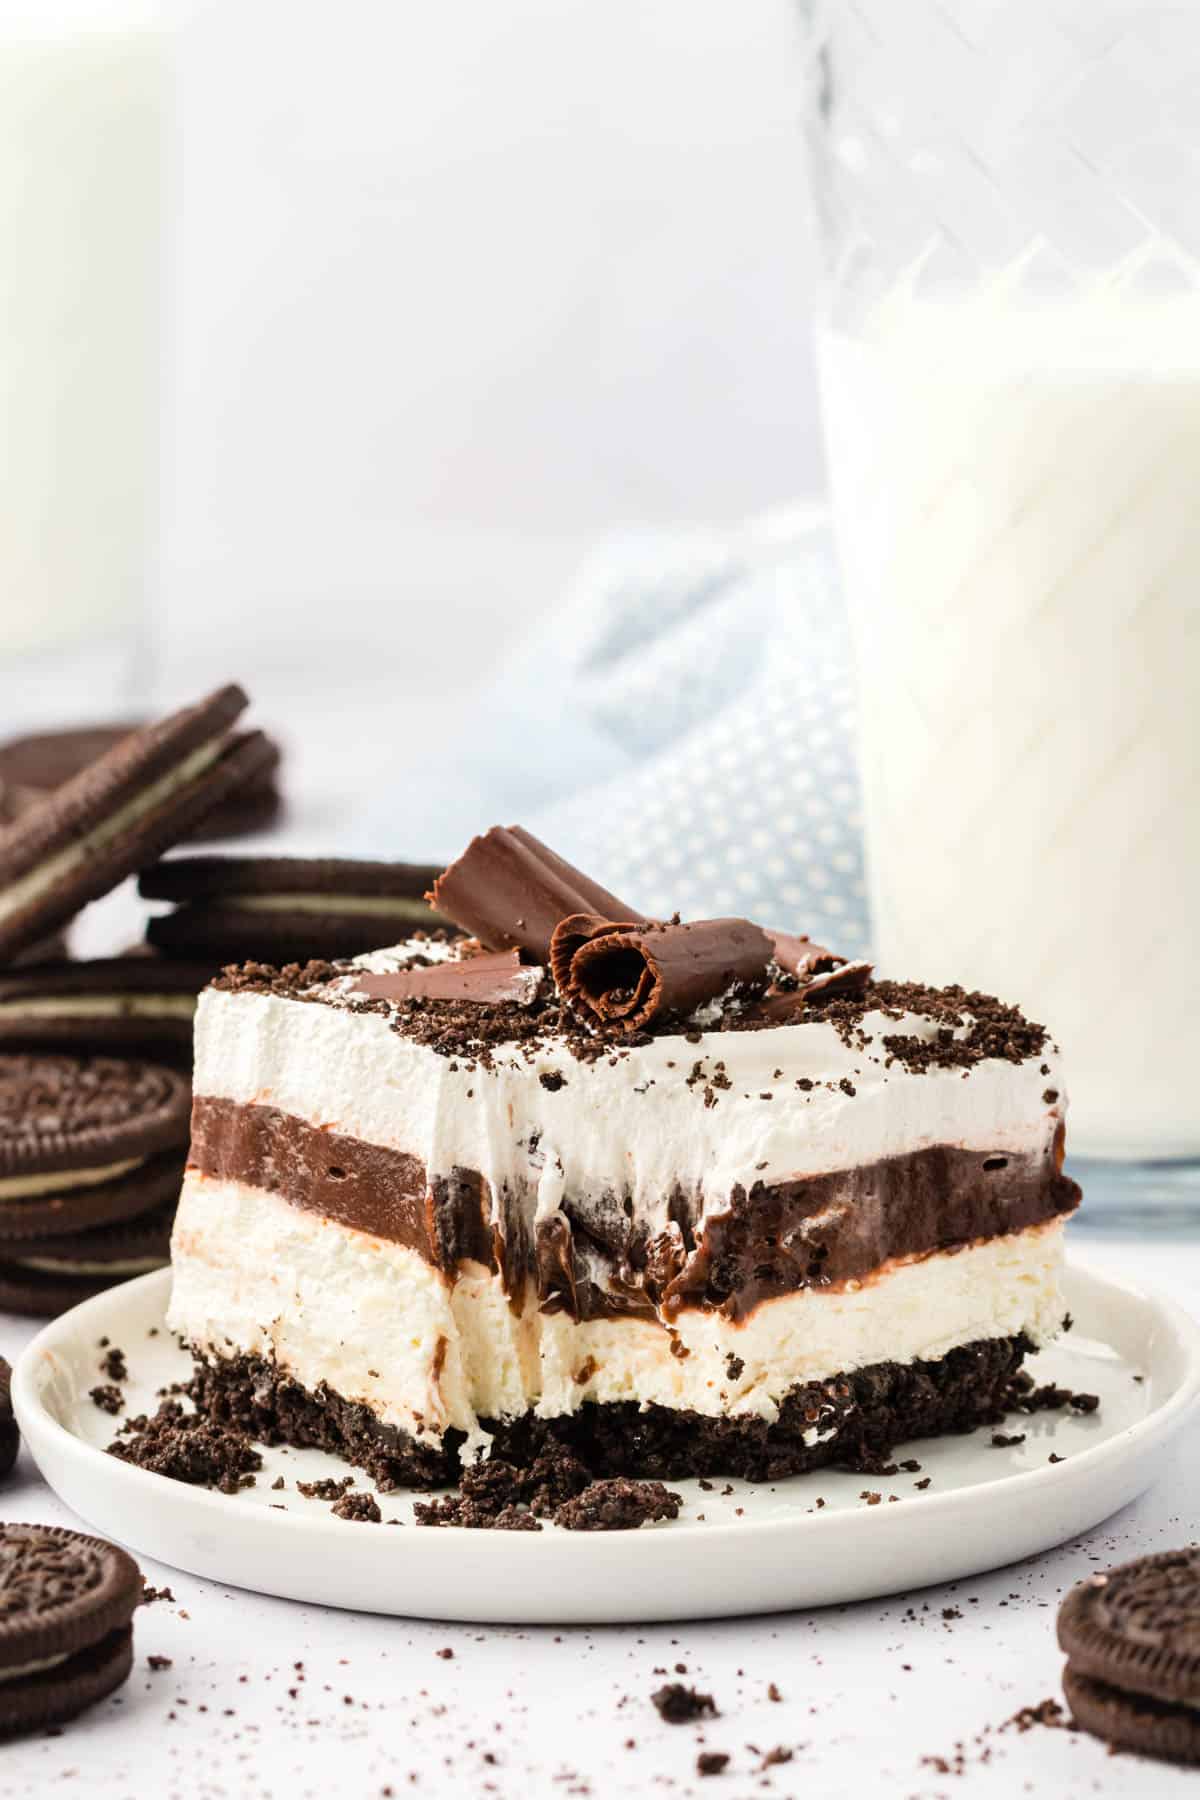 a slice of chocolate lasagna on a white plate with the mark of a fork where one bite has been taken out, surrounded by oreo cookies, cookie crumbs and a glass of milk in the background